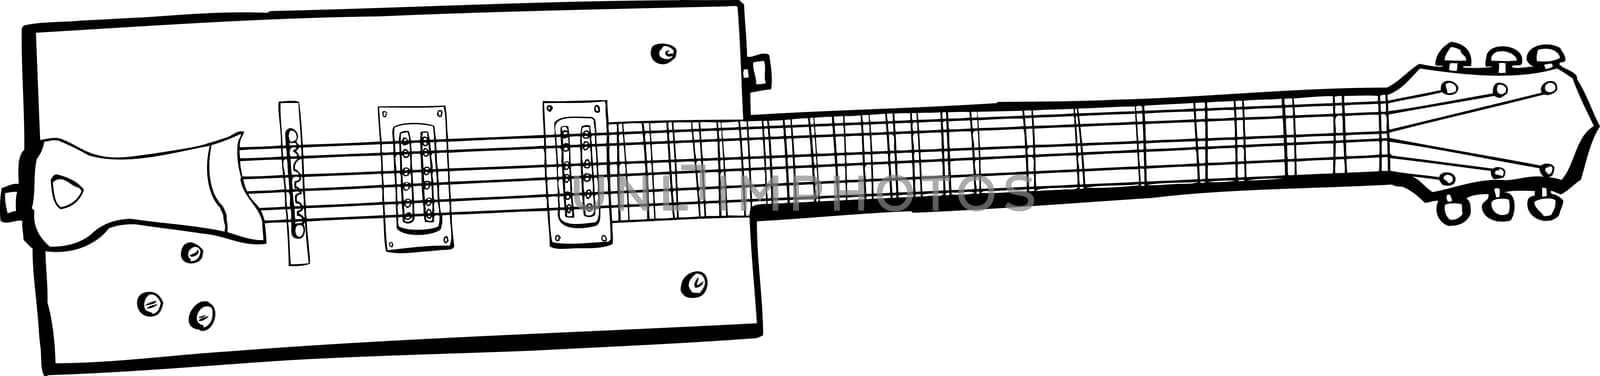 Outlined illustration of a rectangular electric guitar over white